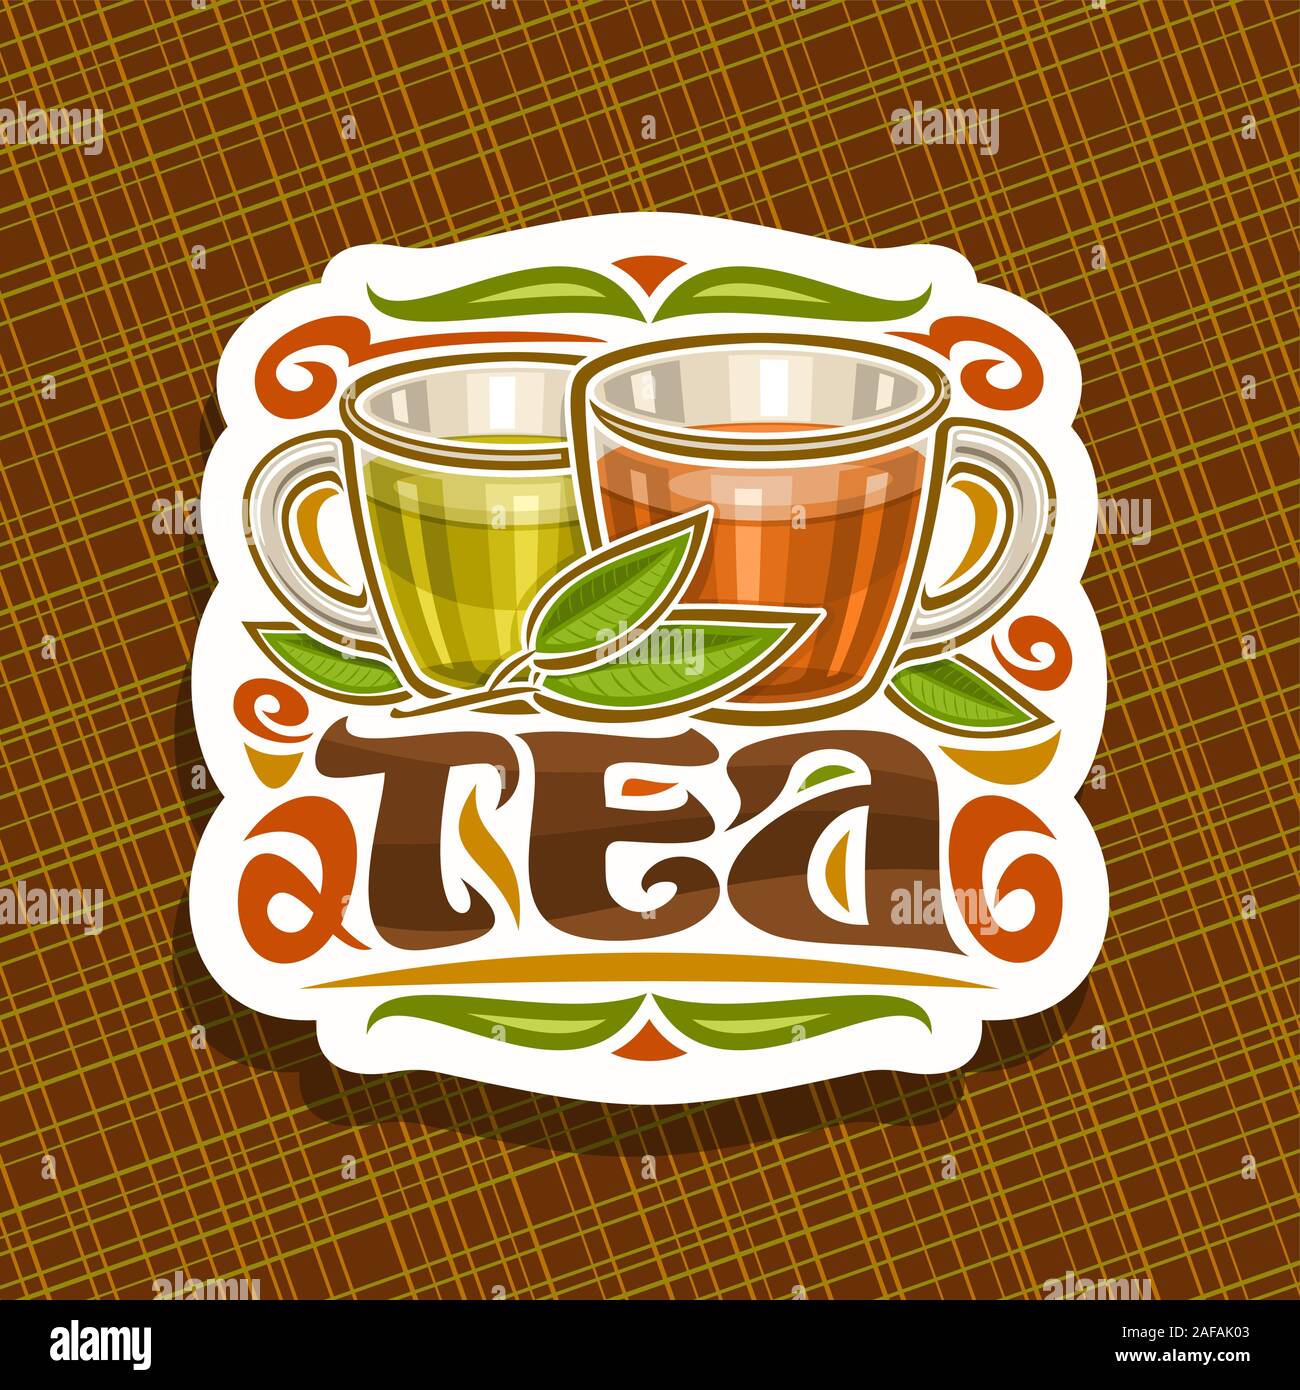 Vector logo for Tea, decorative cut paper sign with illustration of 2 glass cups with yellow and brown liquid, sprig of tea and flourishes, original b Stock Vector